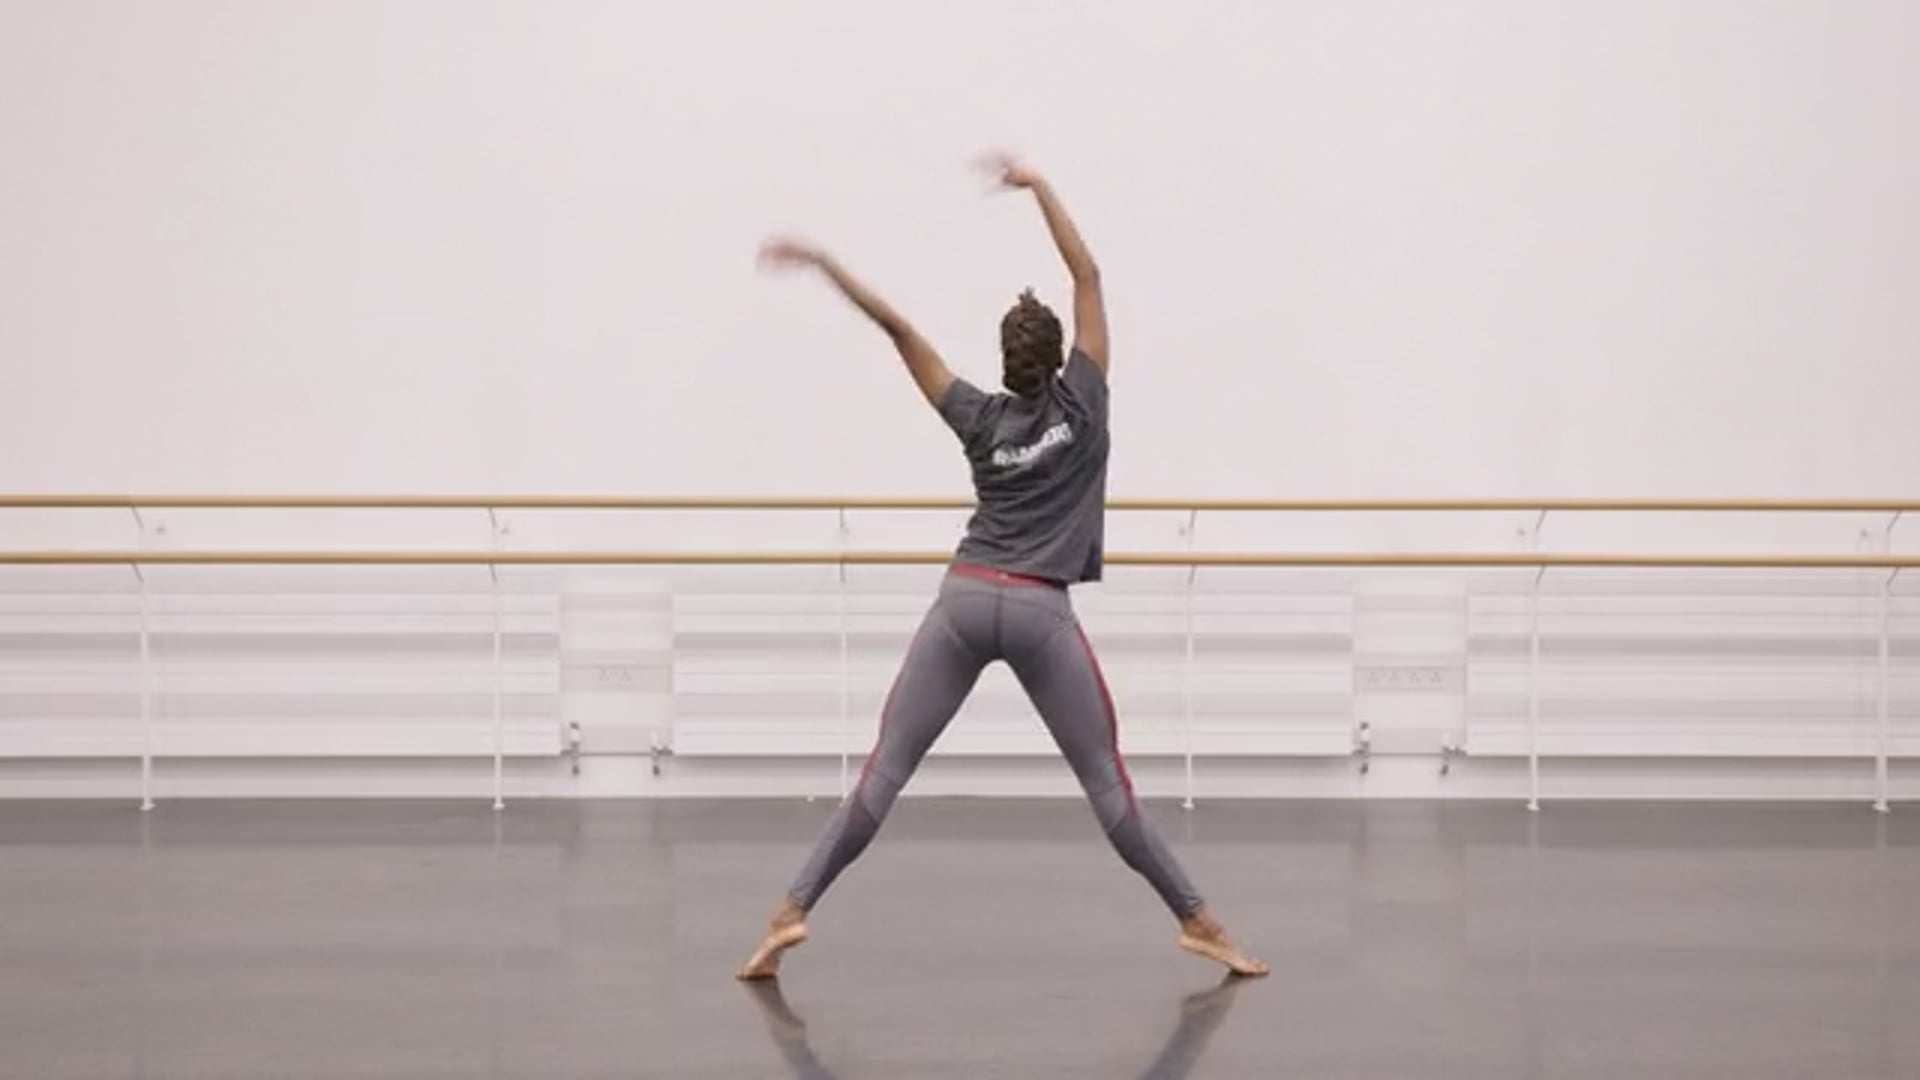 A dancer in a grey outfit is doing a pose in a dance studio.